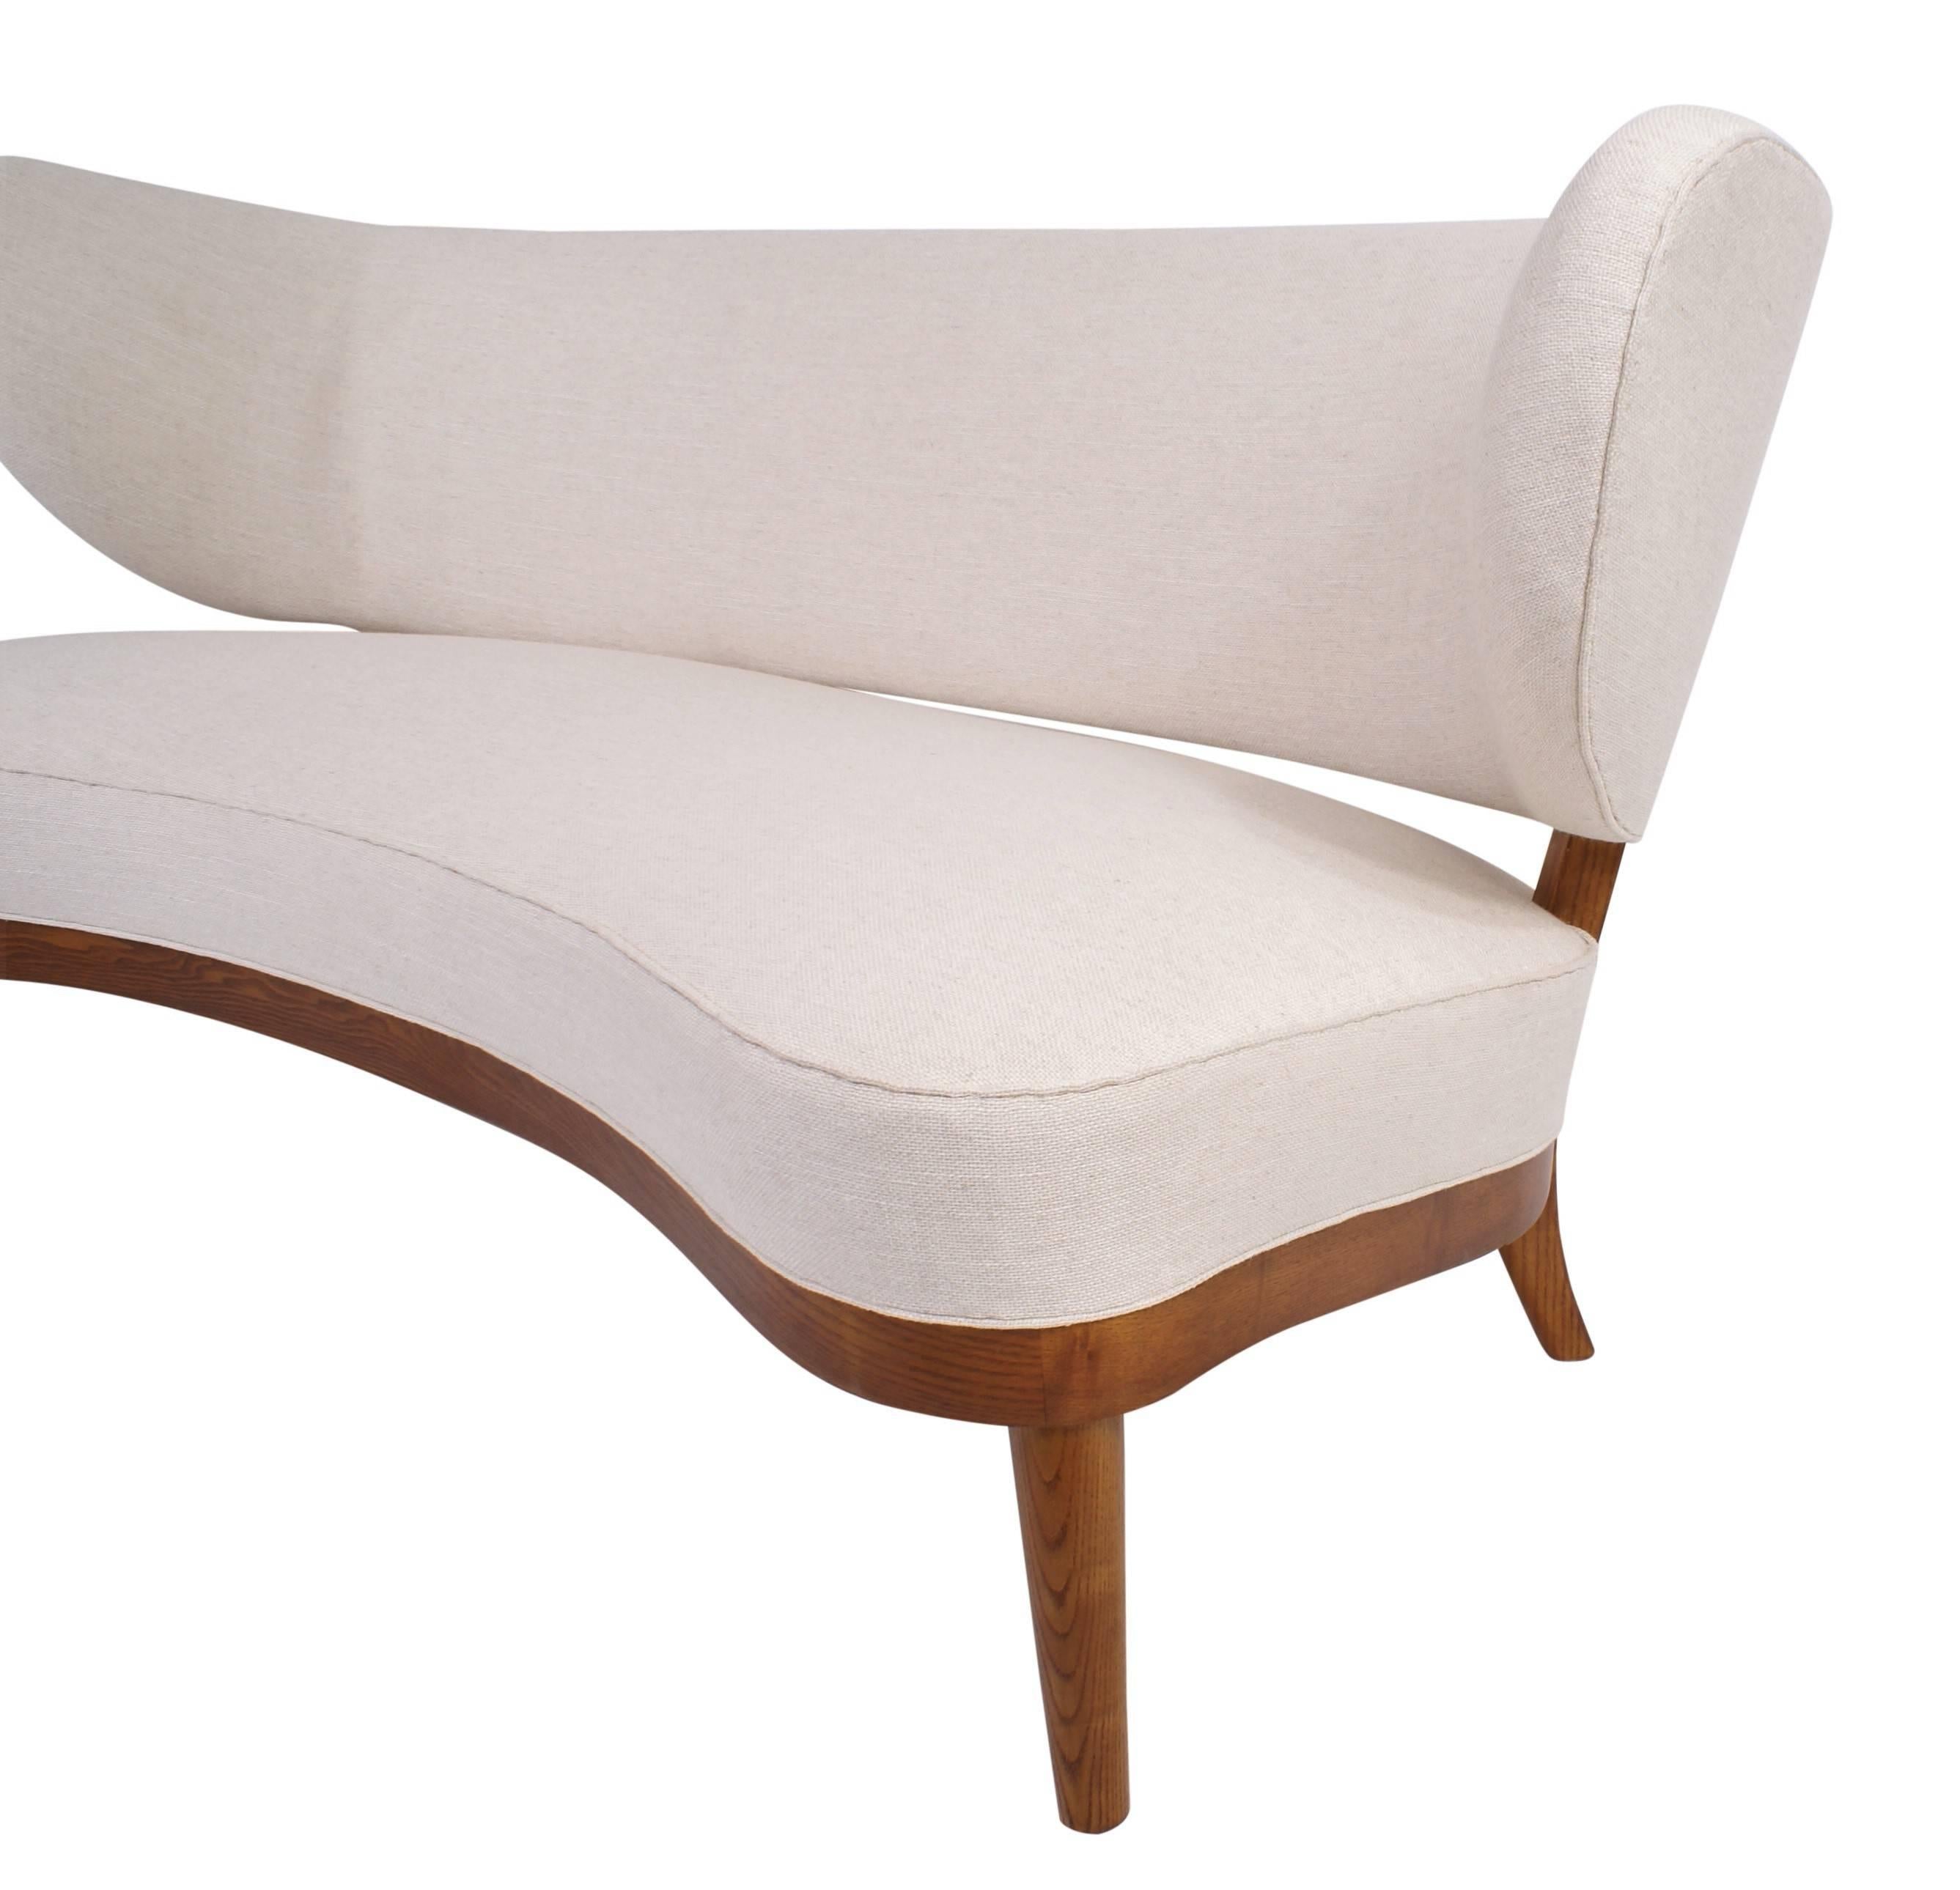 Otto Schulz, sculptural sofa upholster in fabric for Jio Mobler 1950s.

The sofa has been refinished and re-upholstered and is ready for use. Excellent condition.